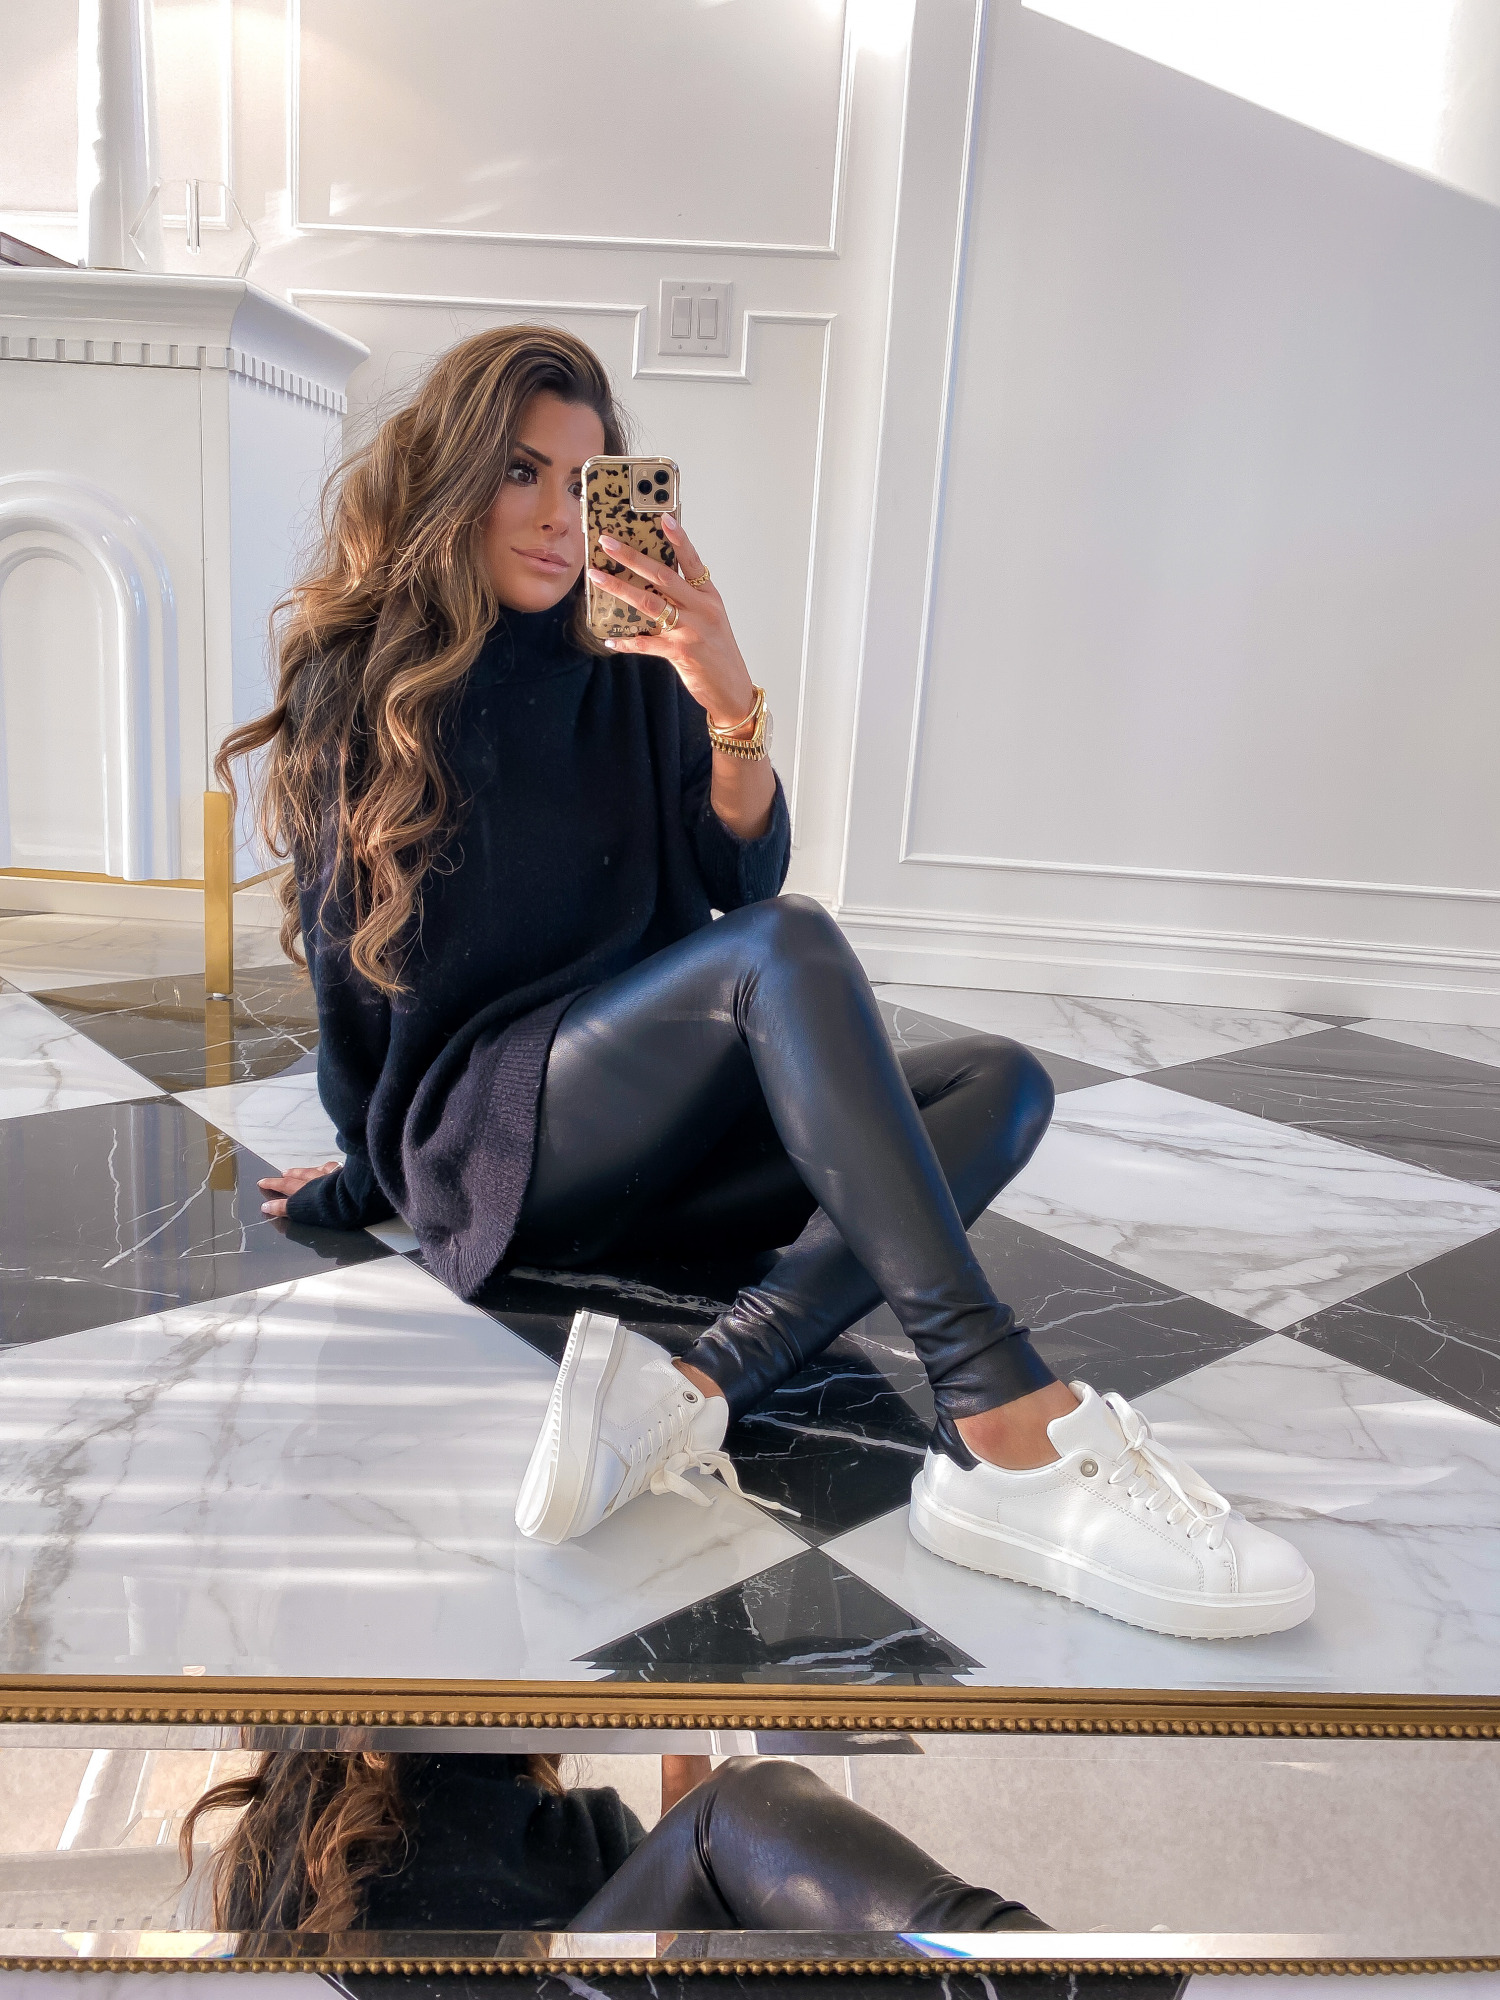 NSALE 2021 commando leggings, best legggings NSALE 2021, mcqueen sneaker dupes NSALE | Nordstrom Anniversary Sale by popular US fashion blog, The Sweetest Thing: image of Emily Gemma wearing a black Free People turtleneck sweater, Commando faux leather leggings, and white sneakers. 